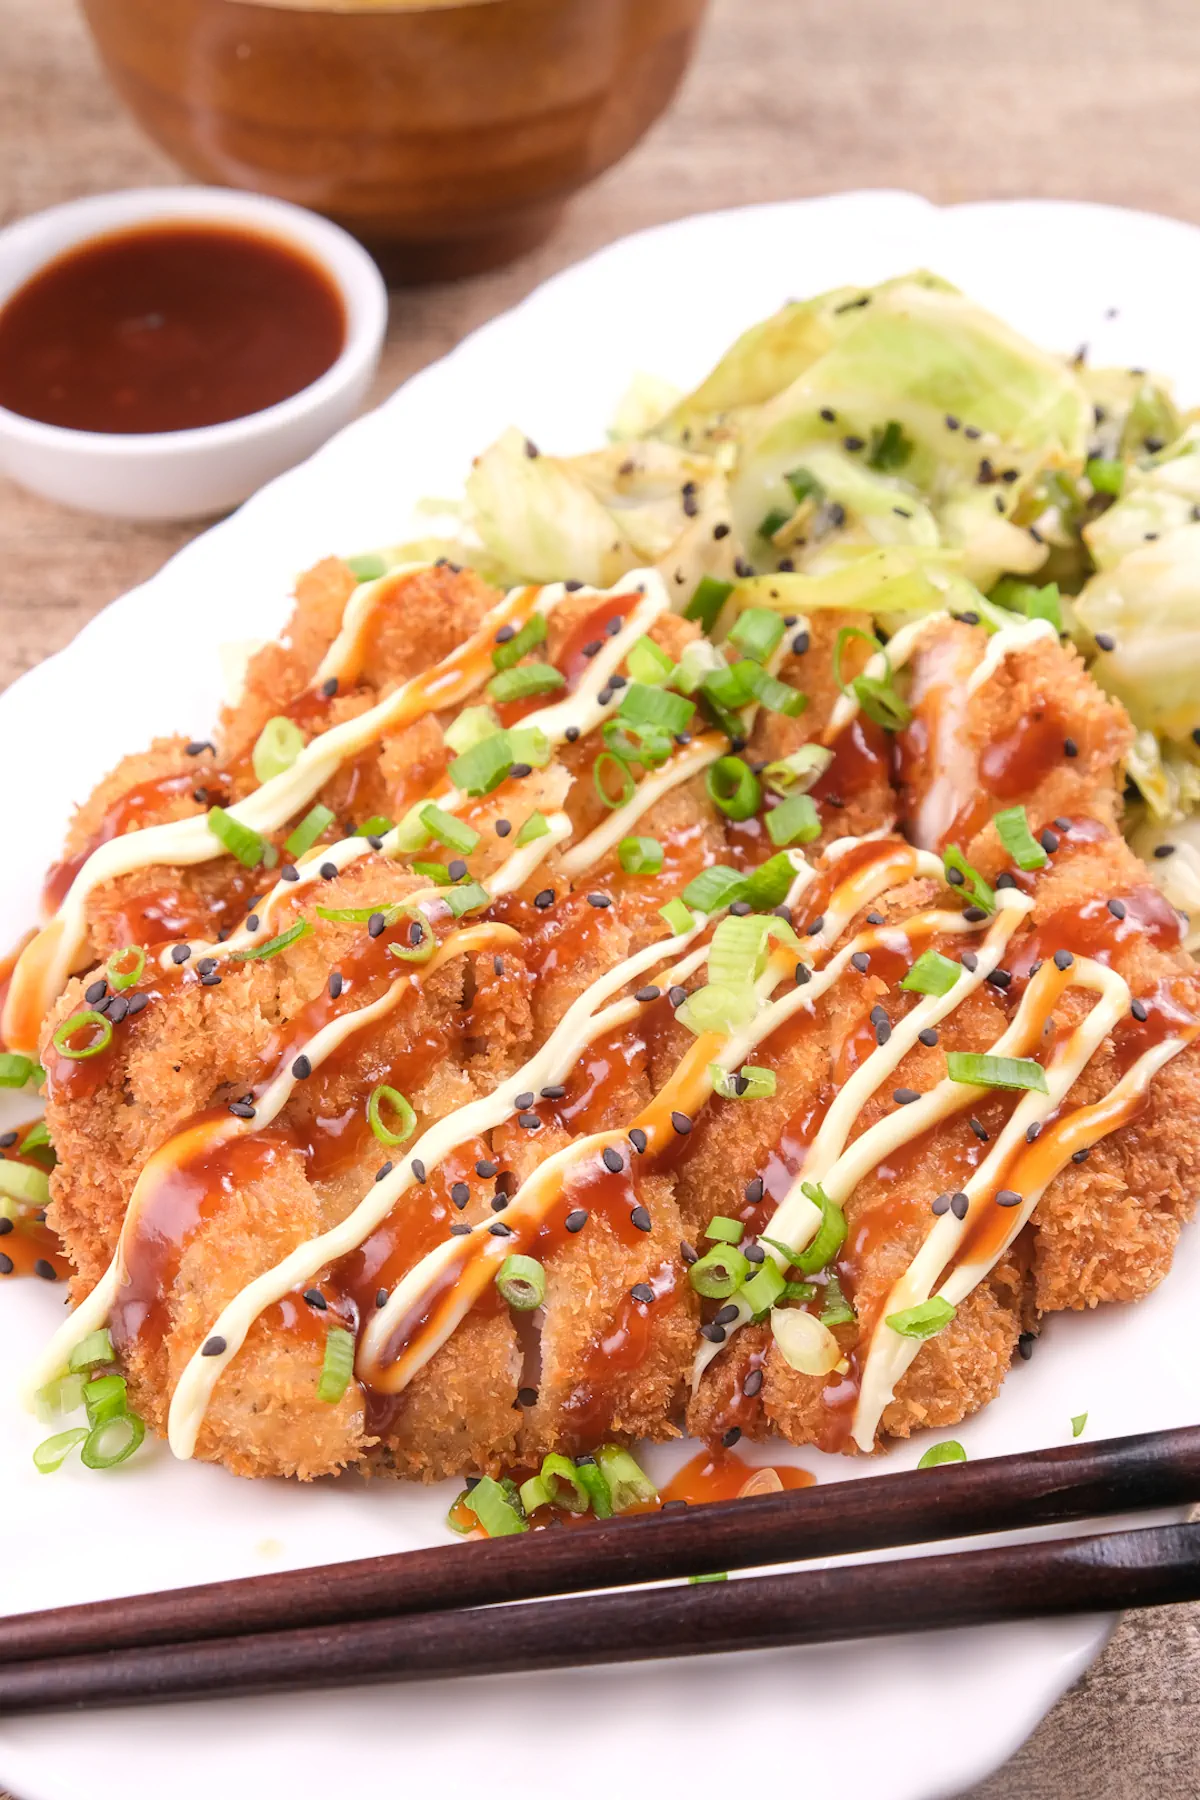 Slices of fried chicken fillets topped with Japanese mayonnaise and katsu sauce.